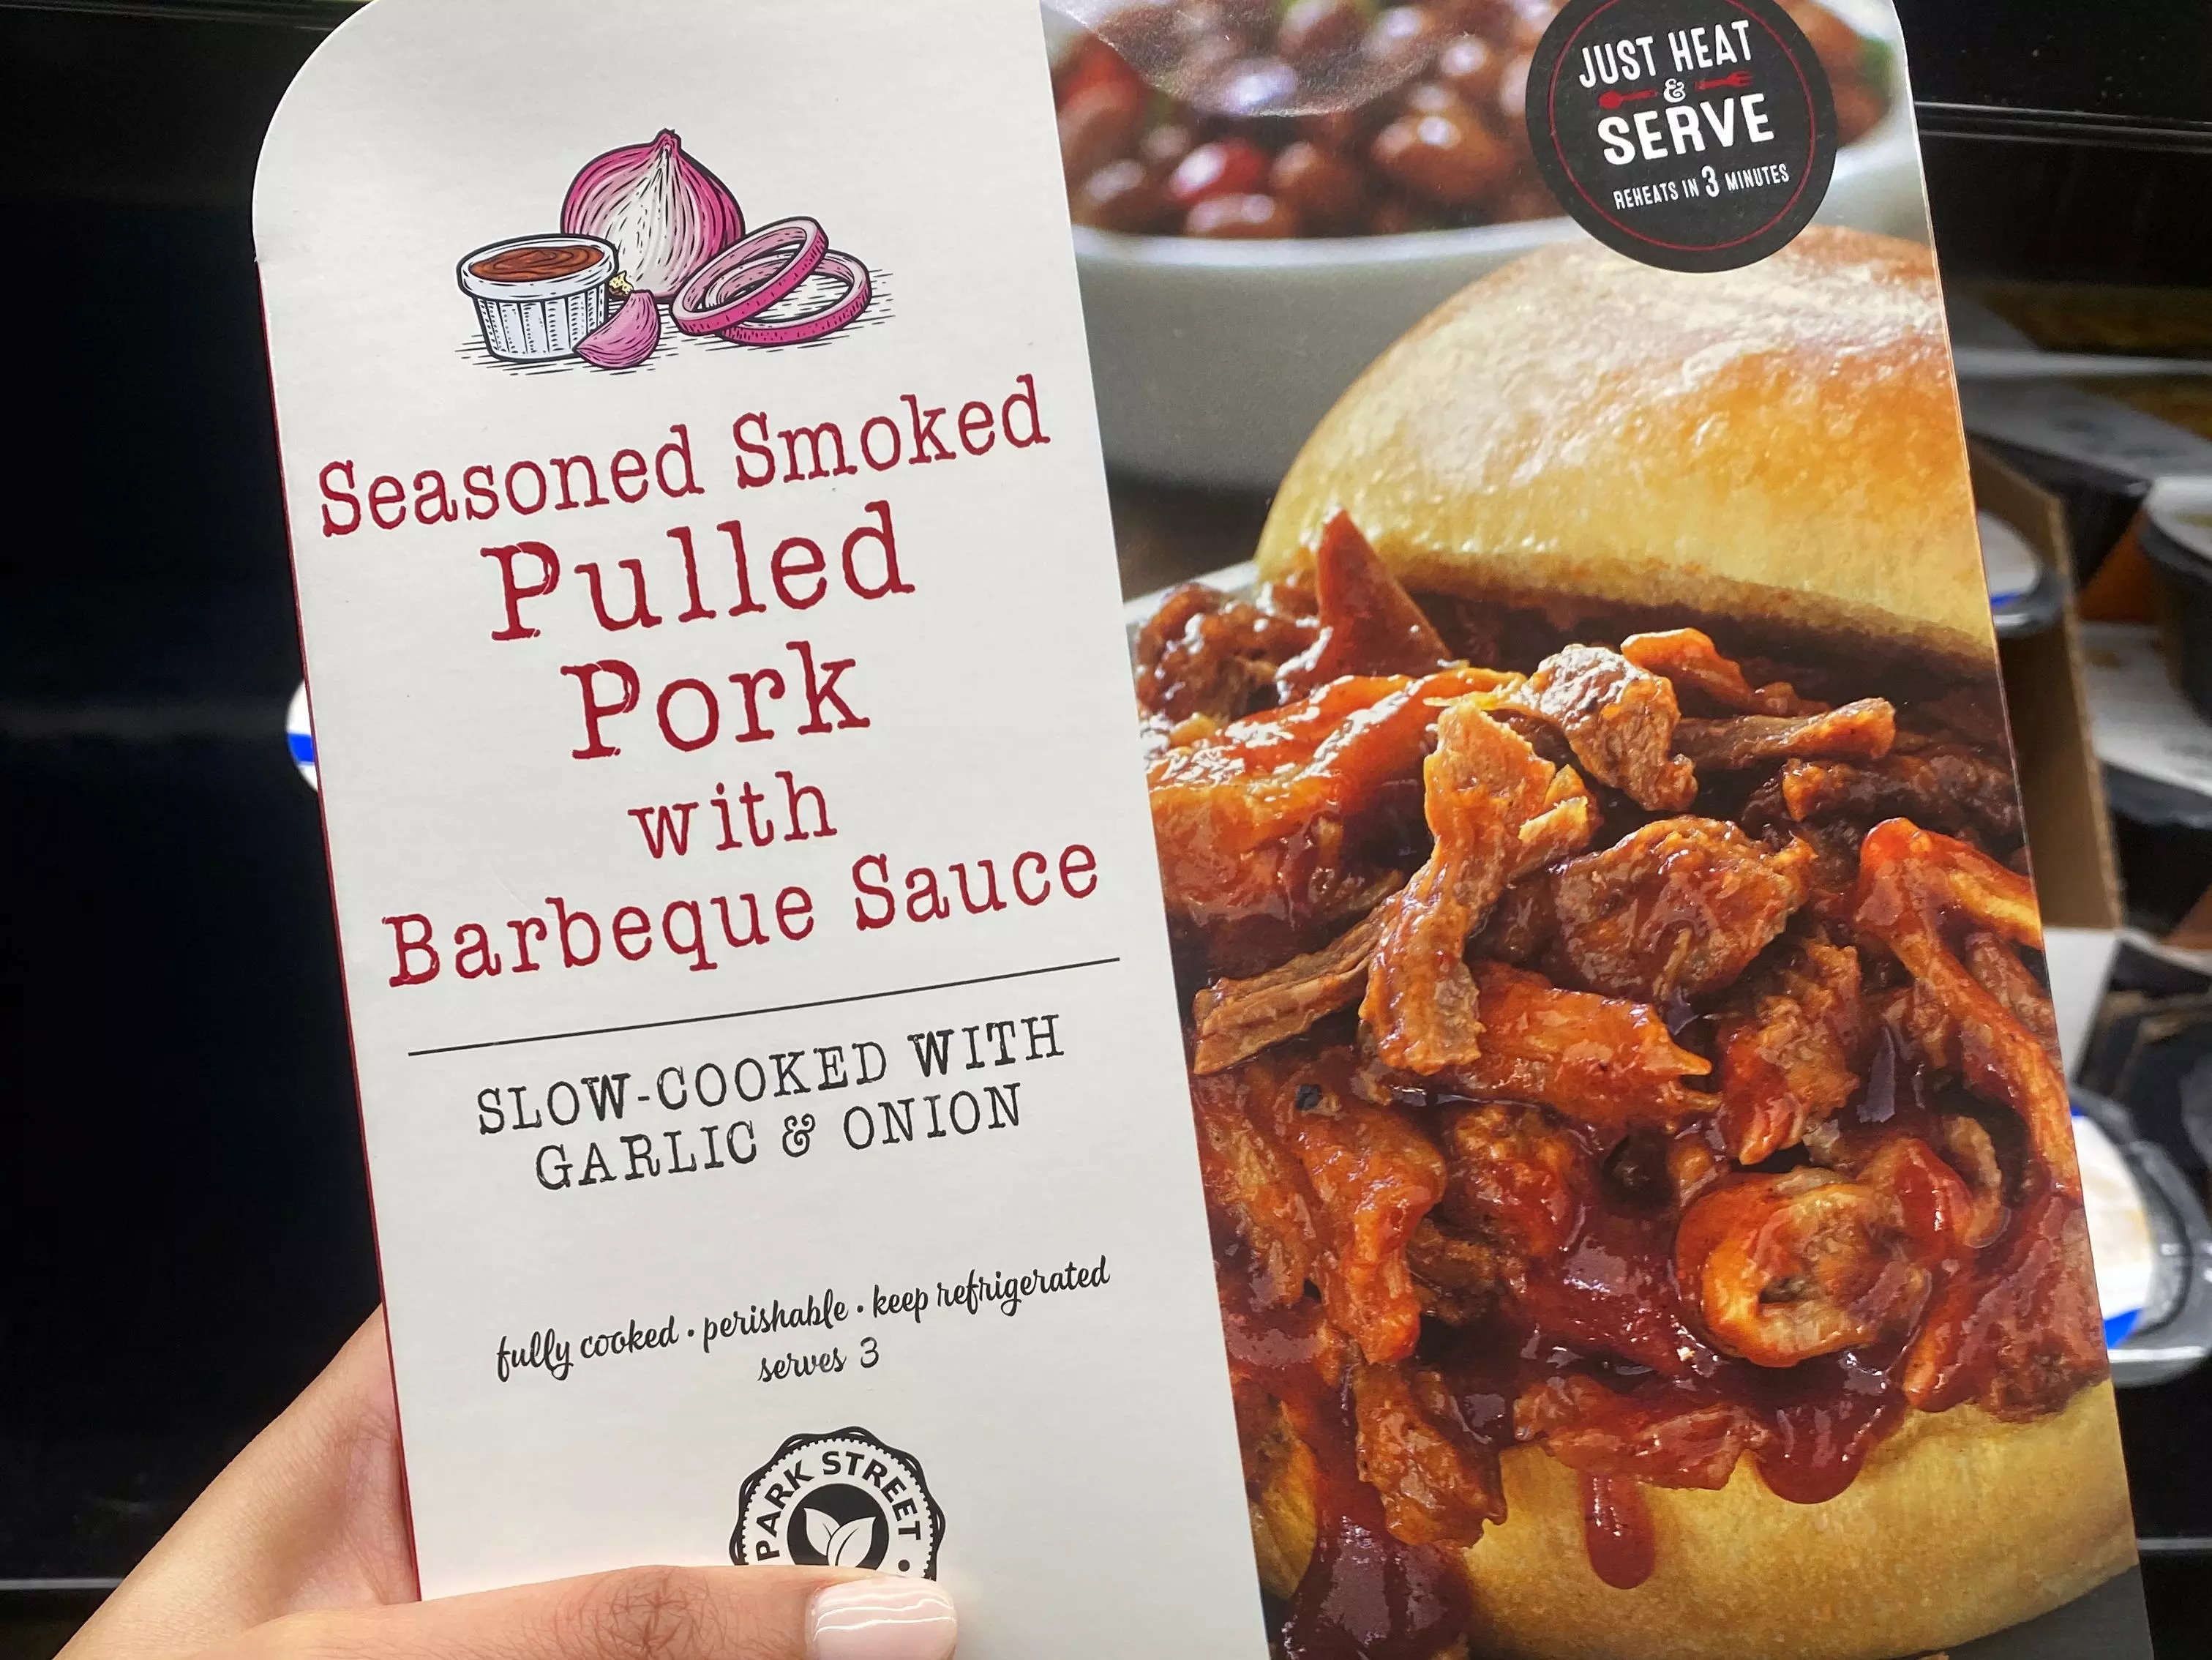 Hand holding pack of pulled pork at Aldi